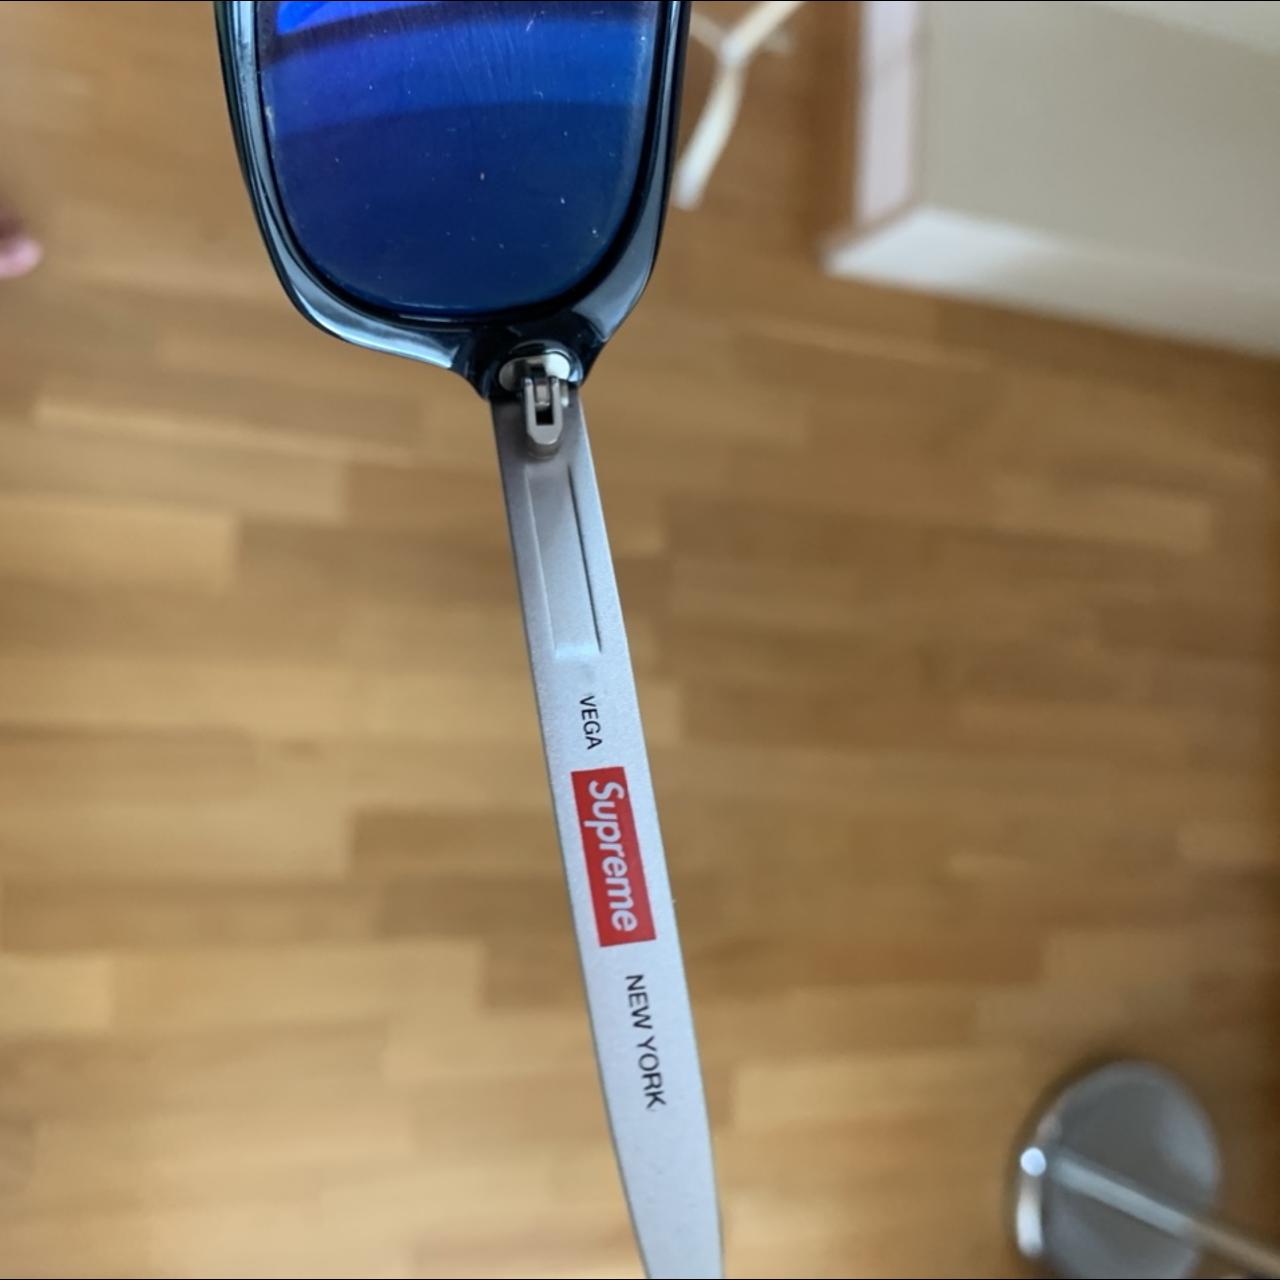 Selling these supreme vega sunglasses from summer 16...